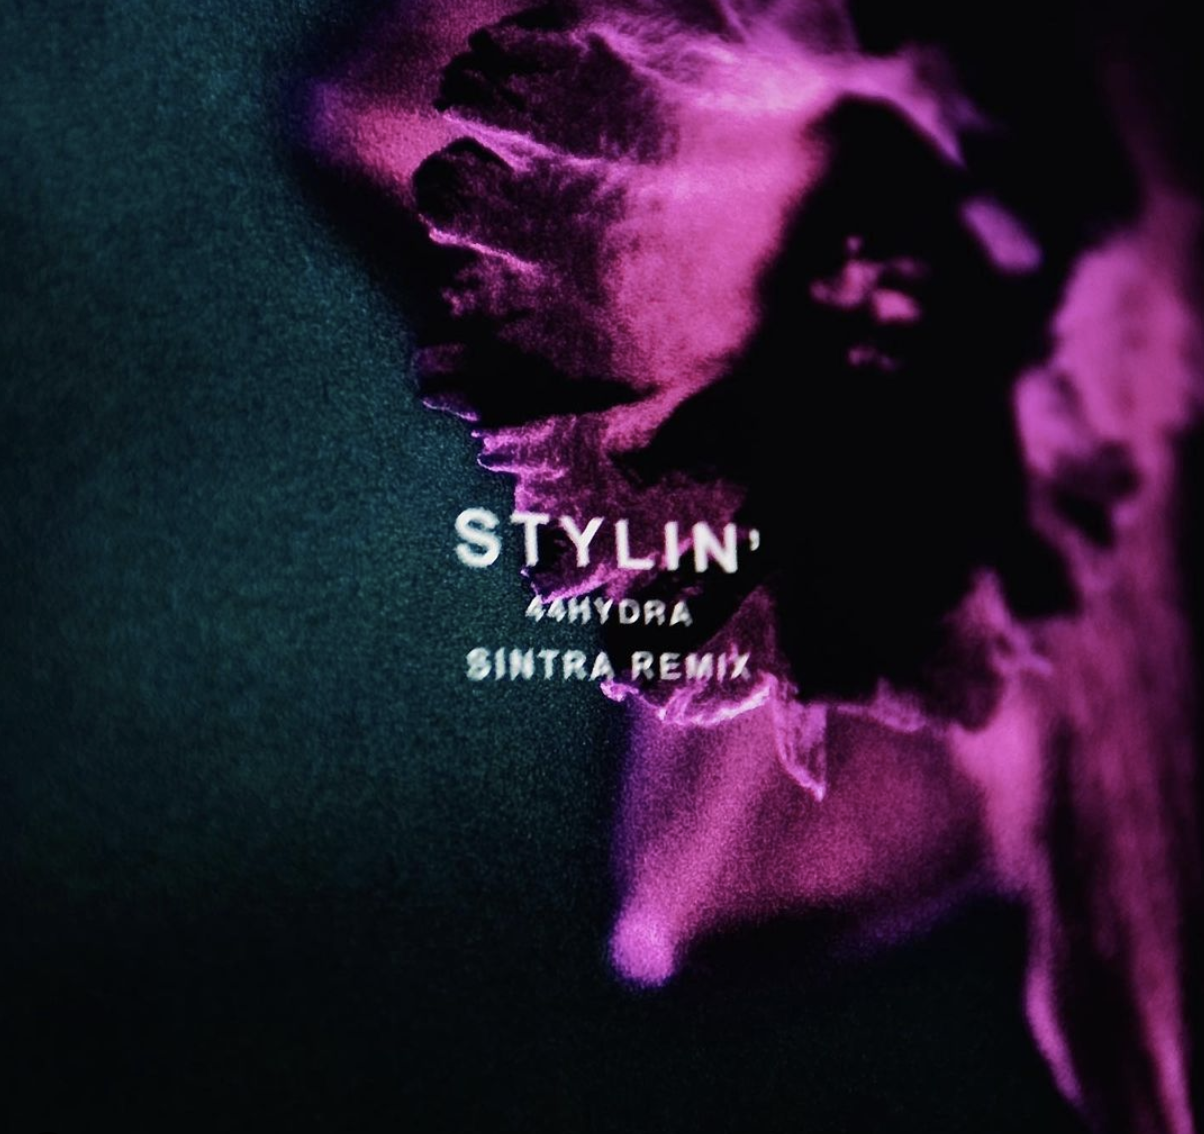 Sintra Puts His Take On ‘Stylin’ By 44hydra